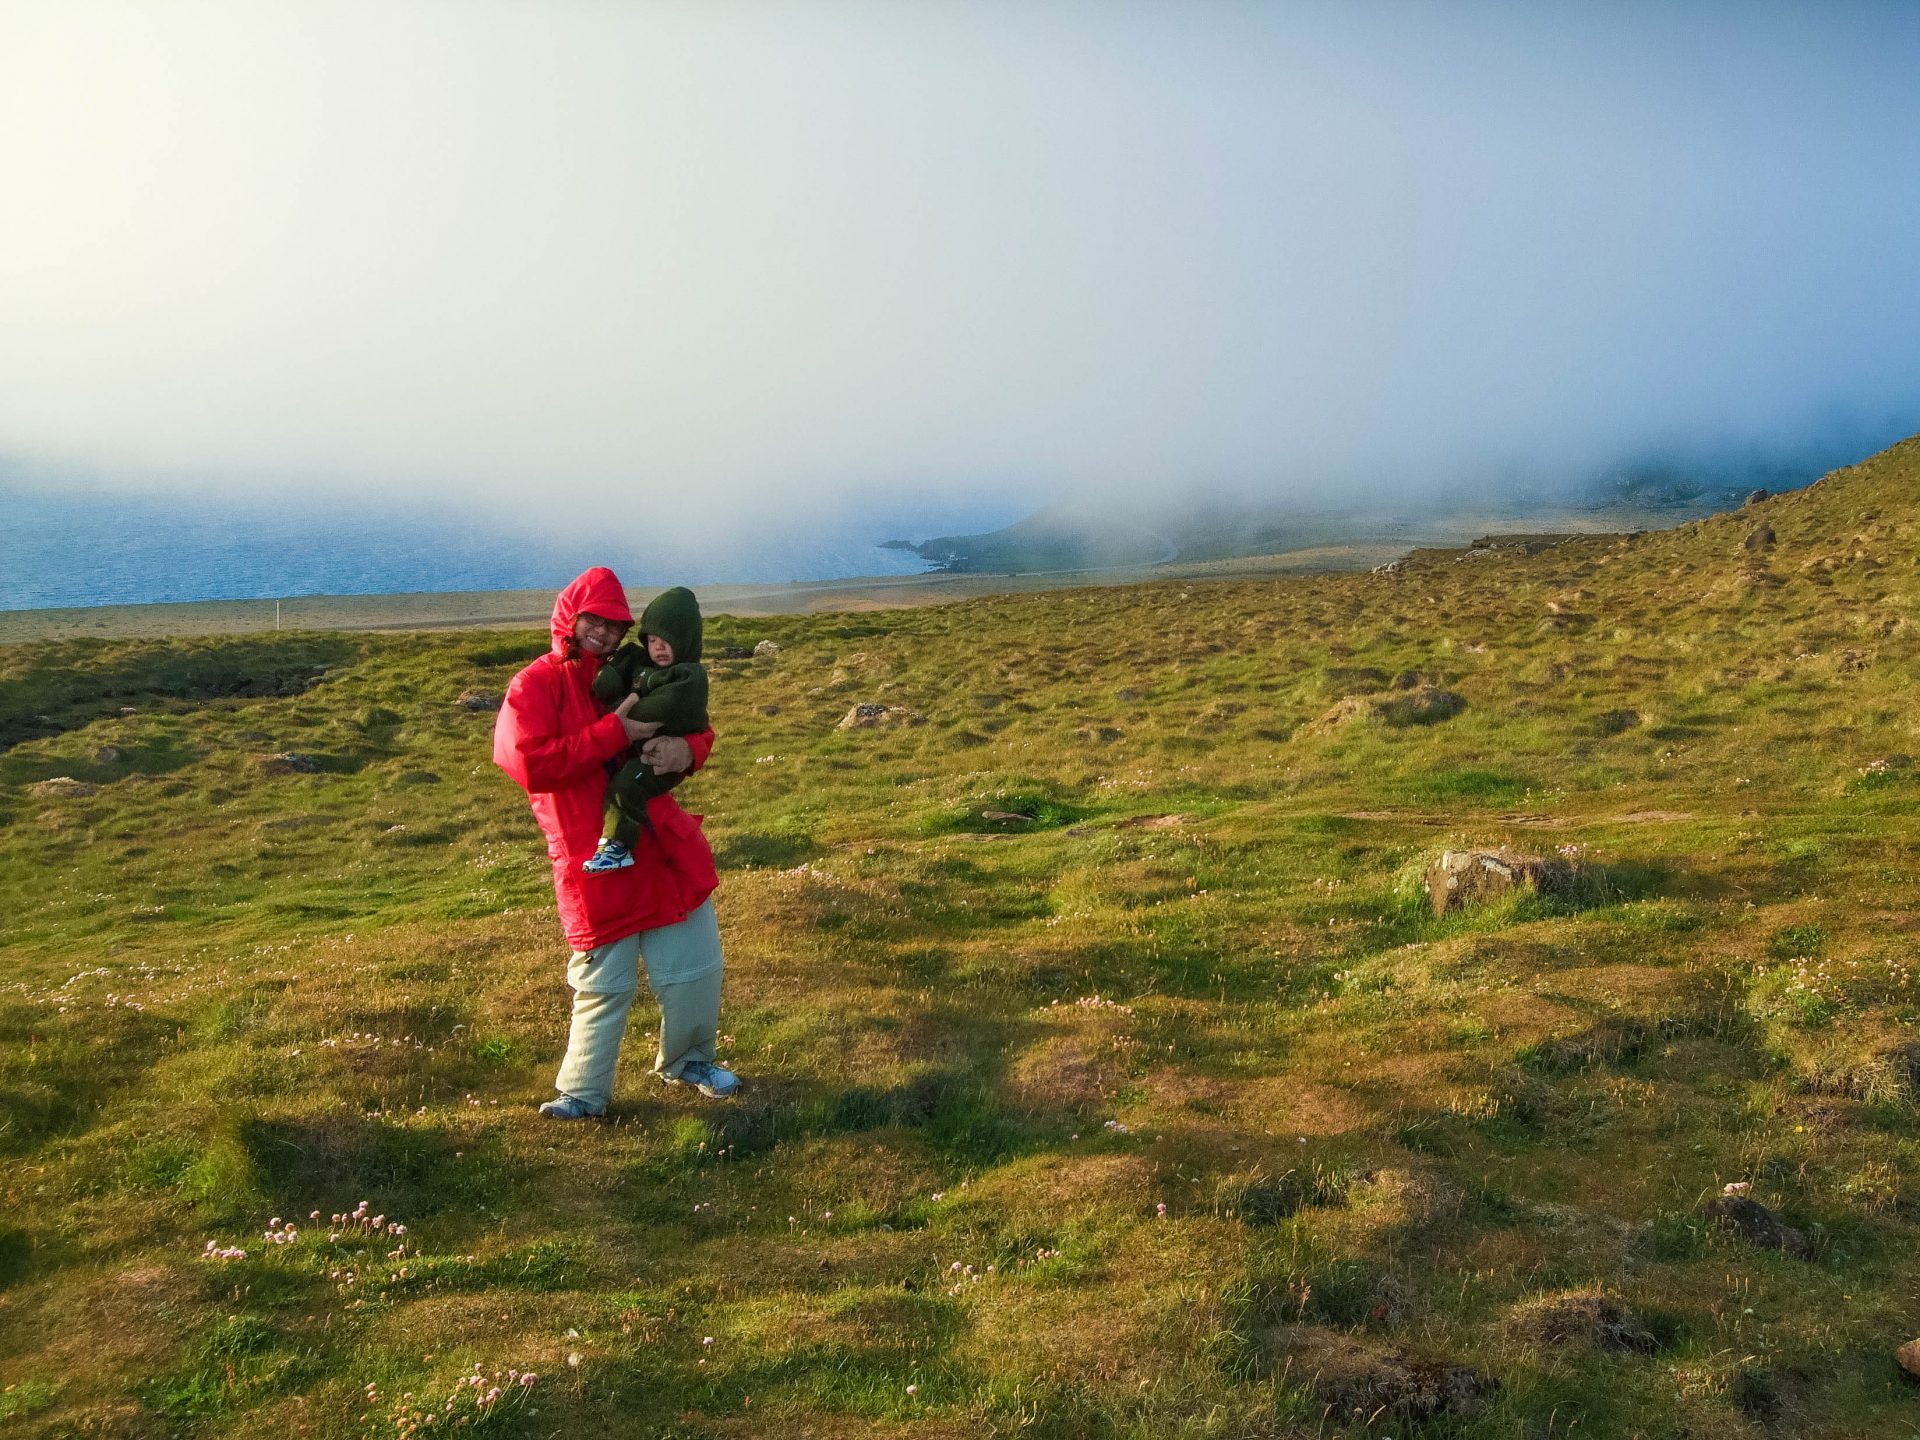 A mother and son brace against the wind as they experience one of the family friendly hikes in Iceland along the Latrabjarg Bird Cliffs in Icelands Westfjords